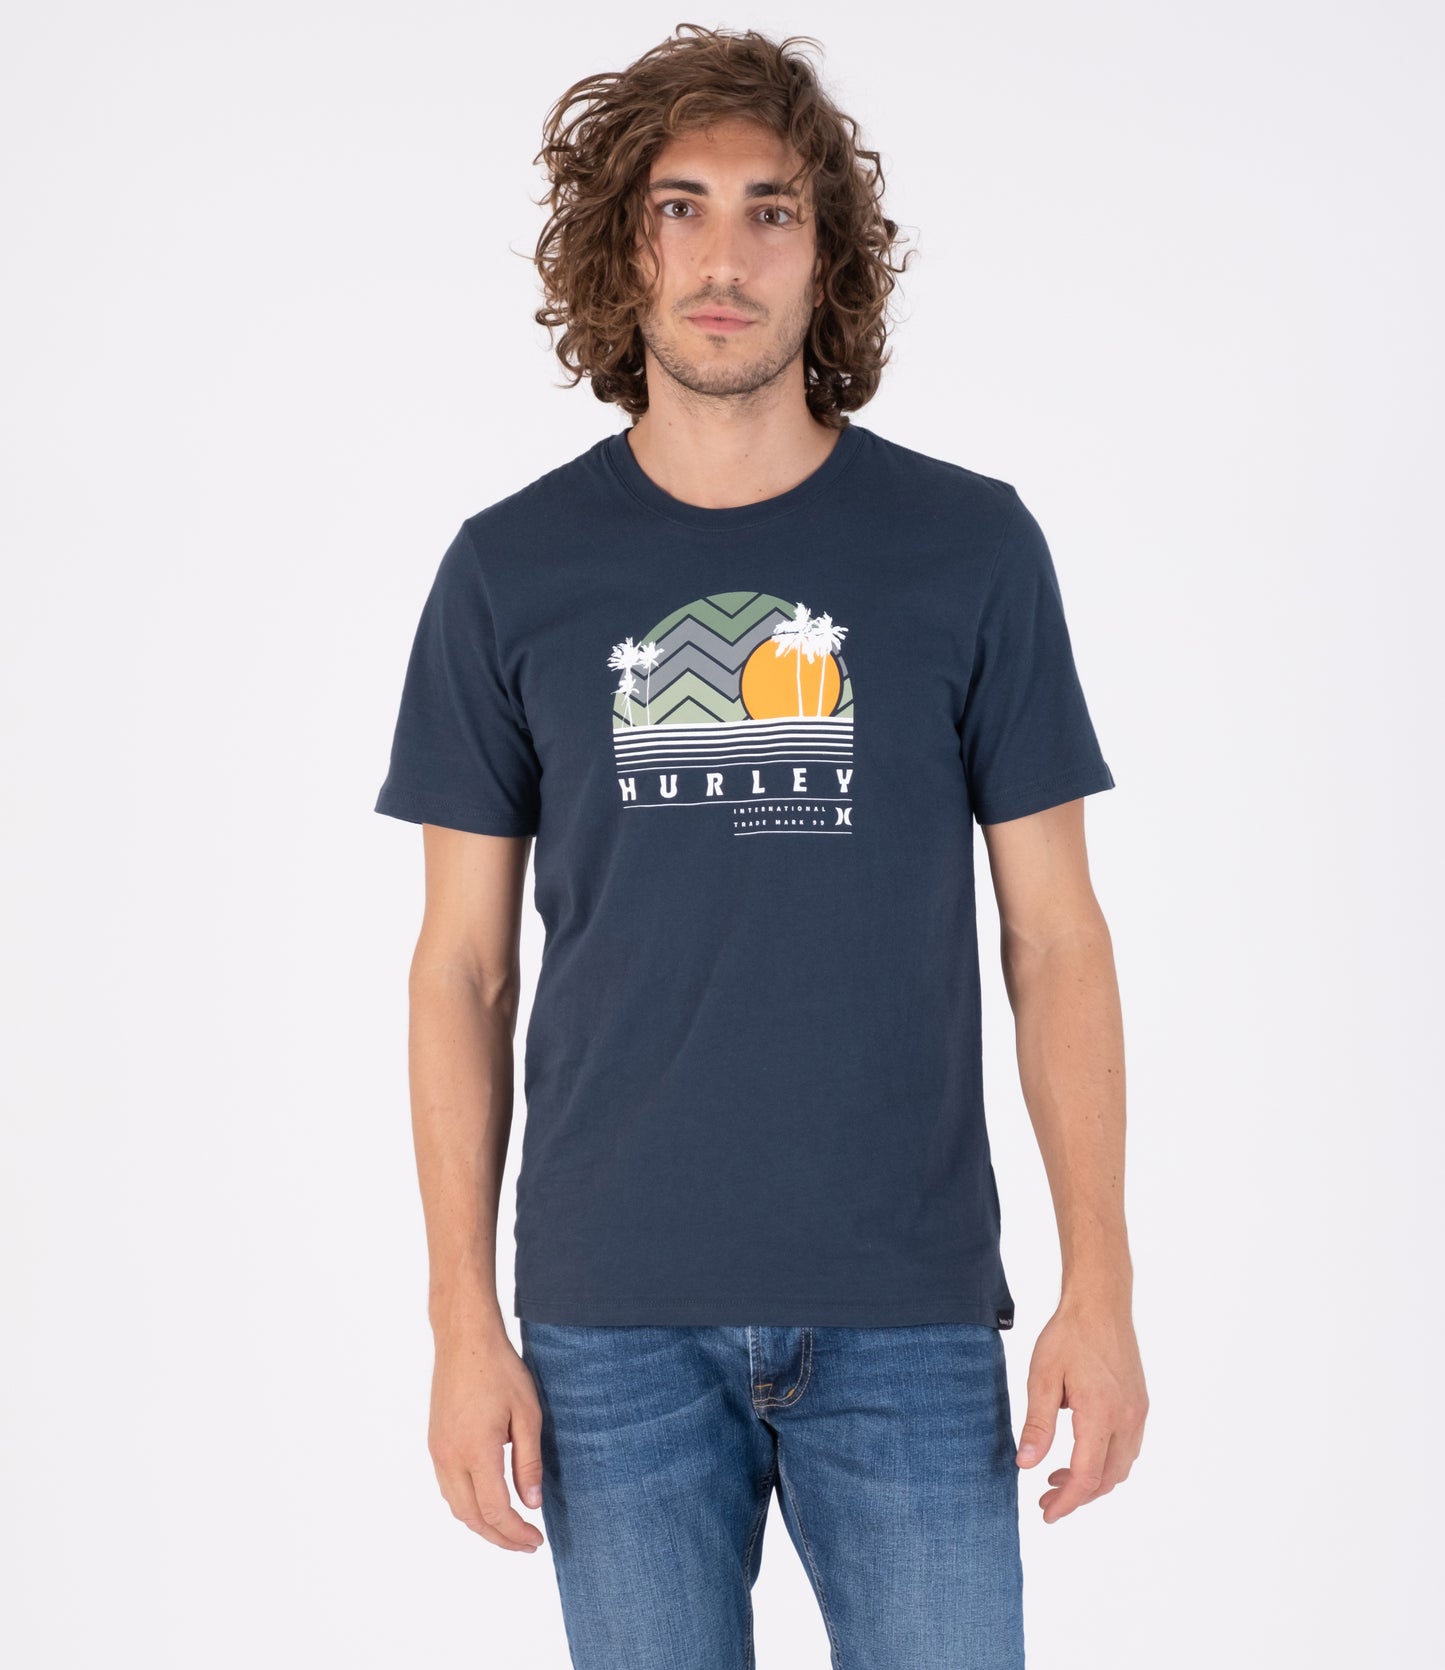 T-SHIRT HURLEY HOMME EVERYDAY WASHED A FAR S/S NAVY